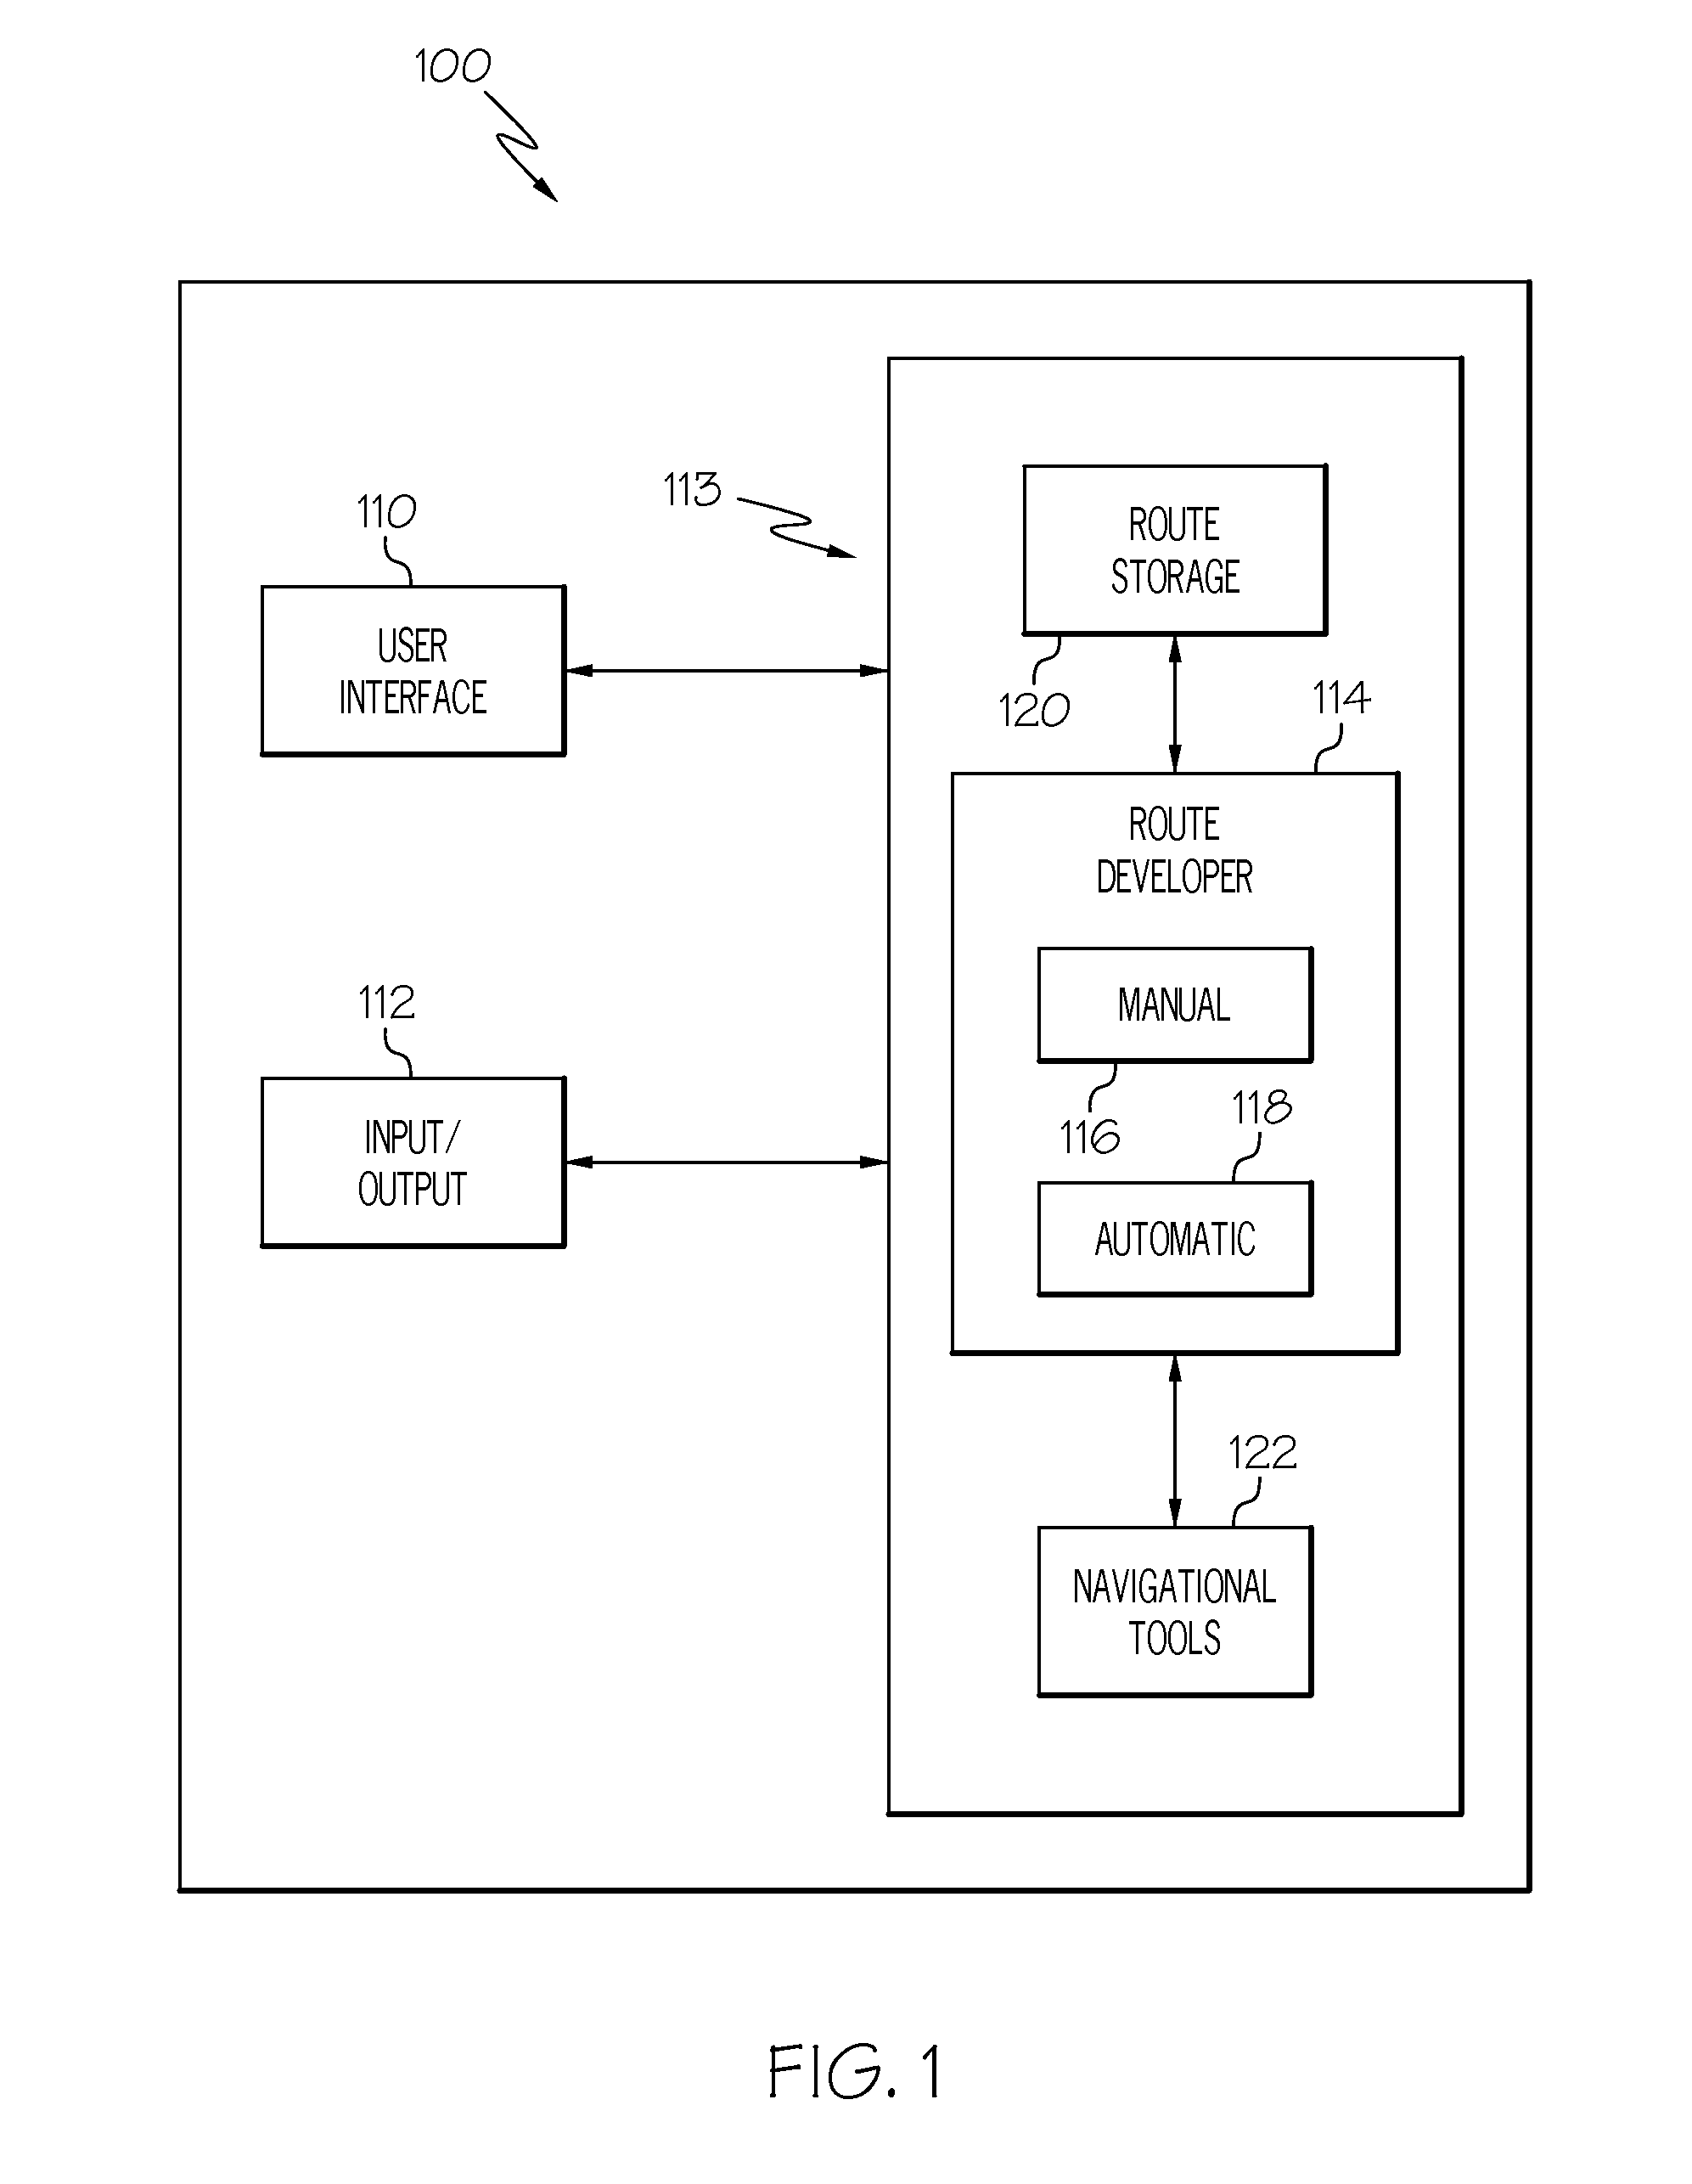 Apparatus and methods for routing